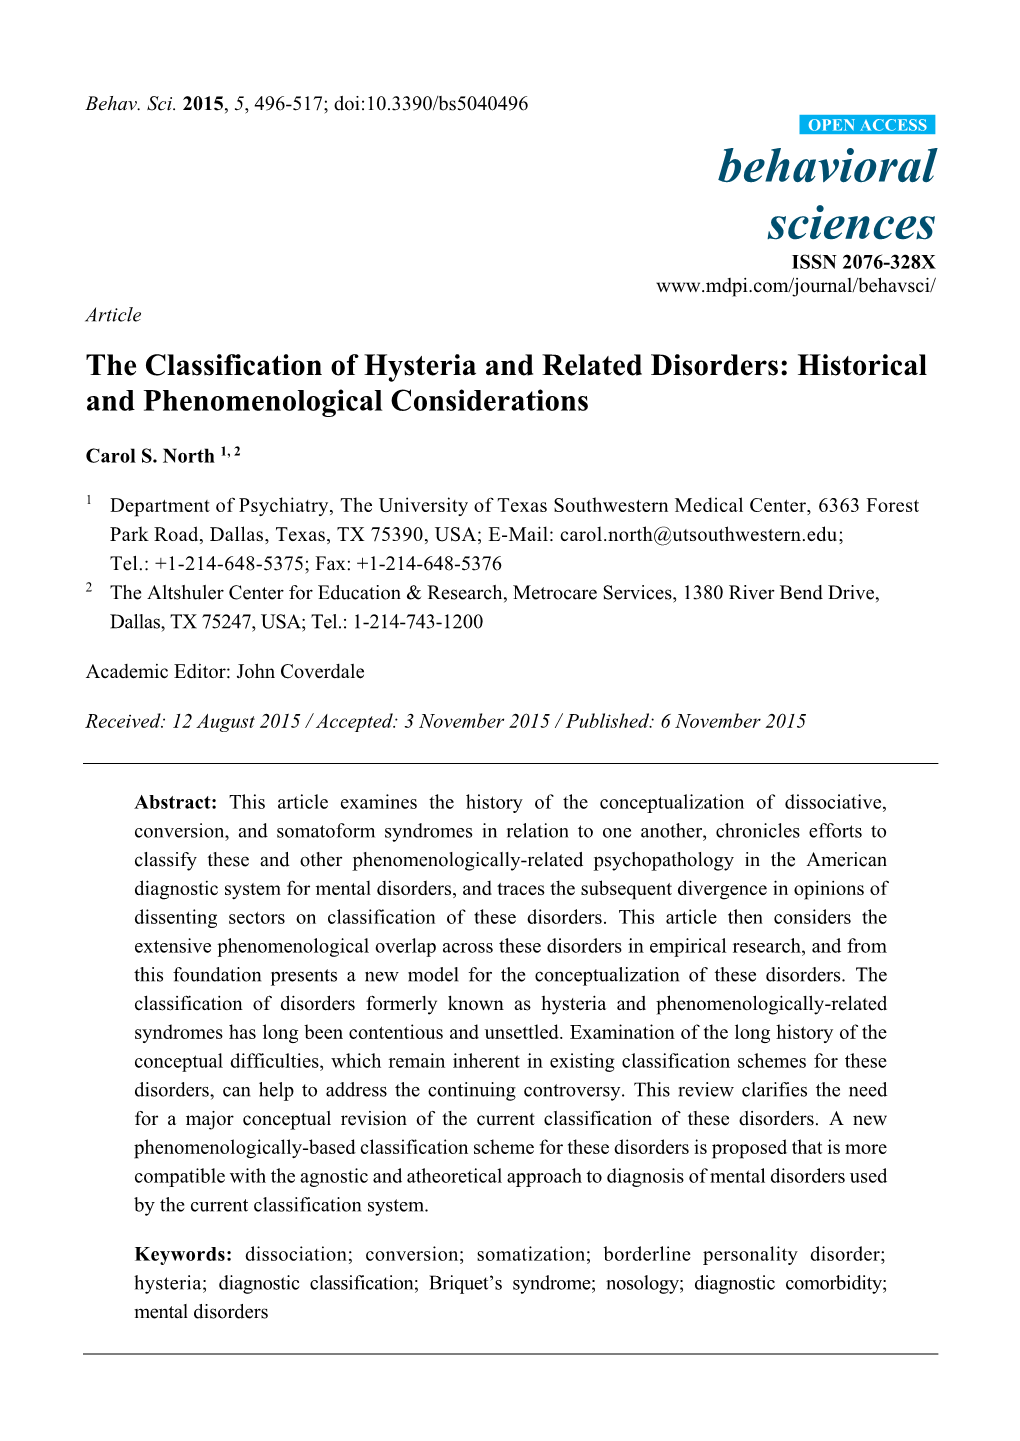 The Classification of Hysteria and Related Disorders: Historical and Phenomenological Considerations